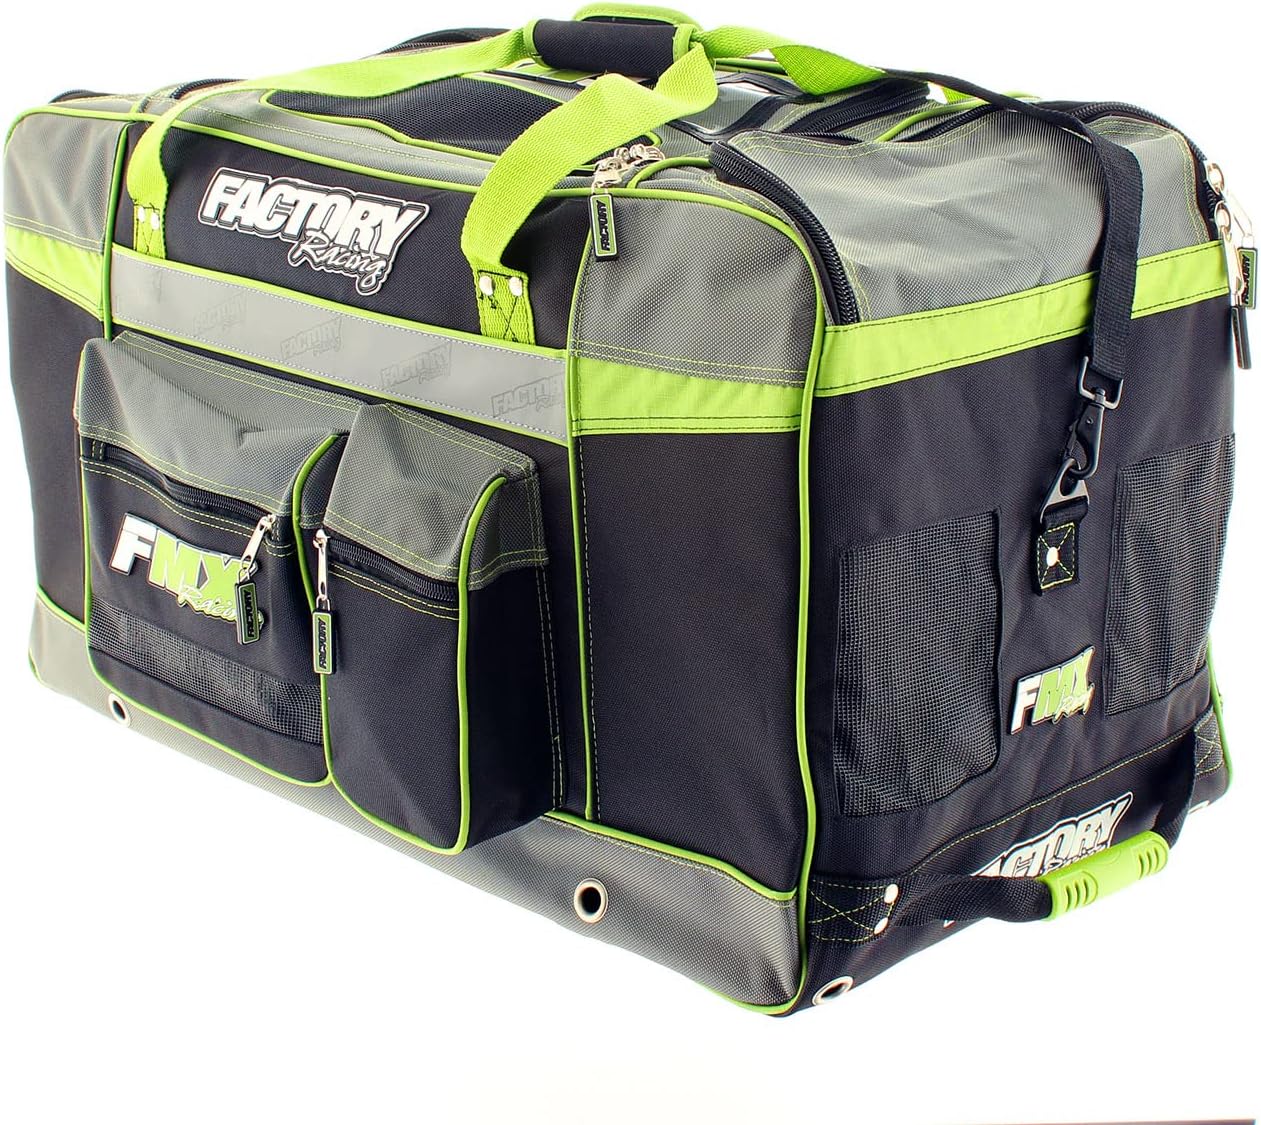 Factory FMX Motocross Gear Bag X-Large Green - Click Image to Close